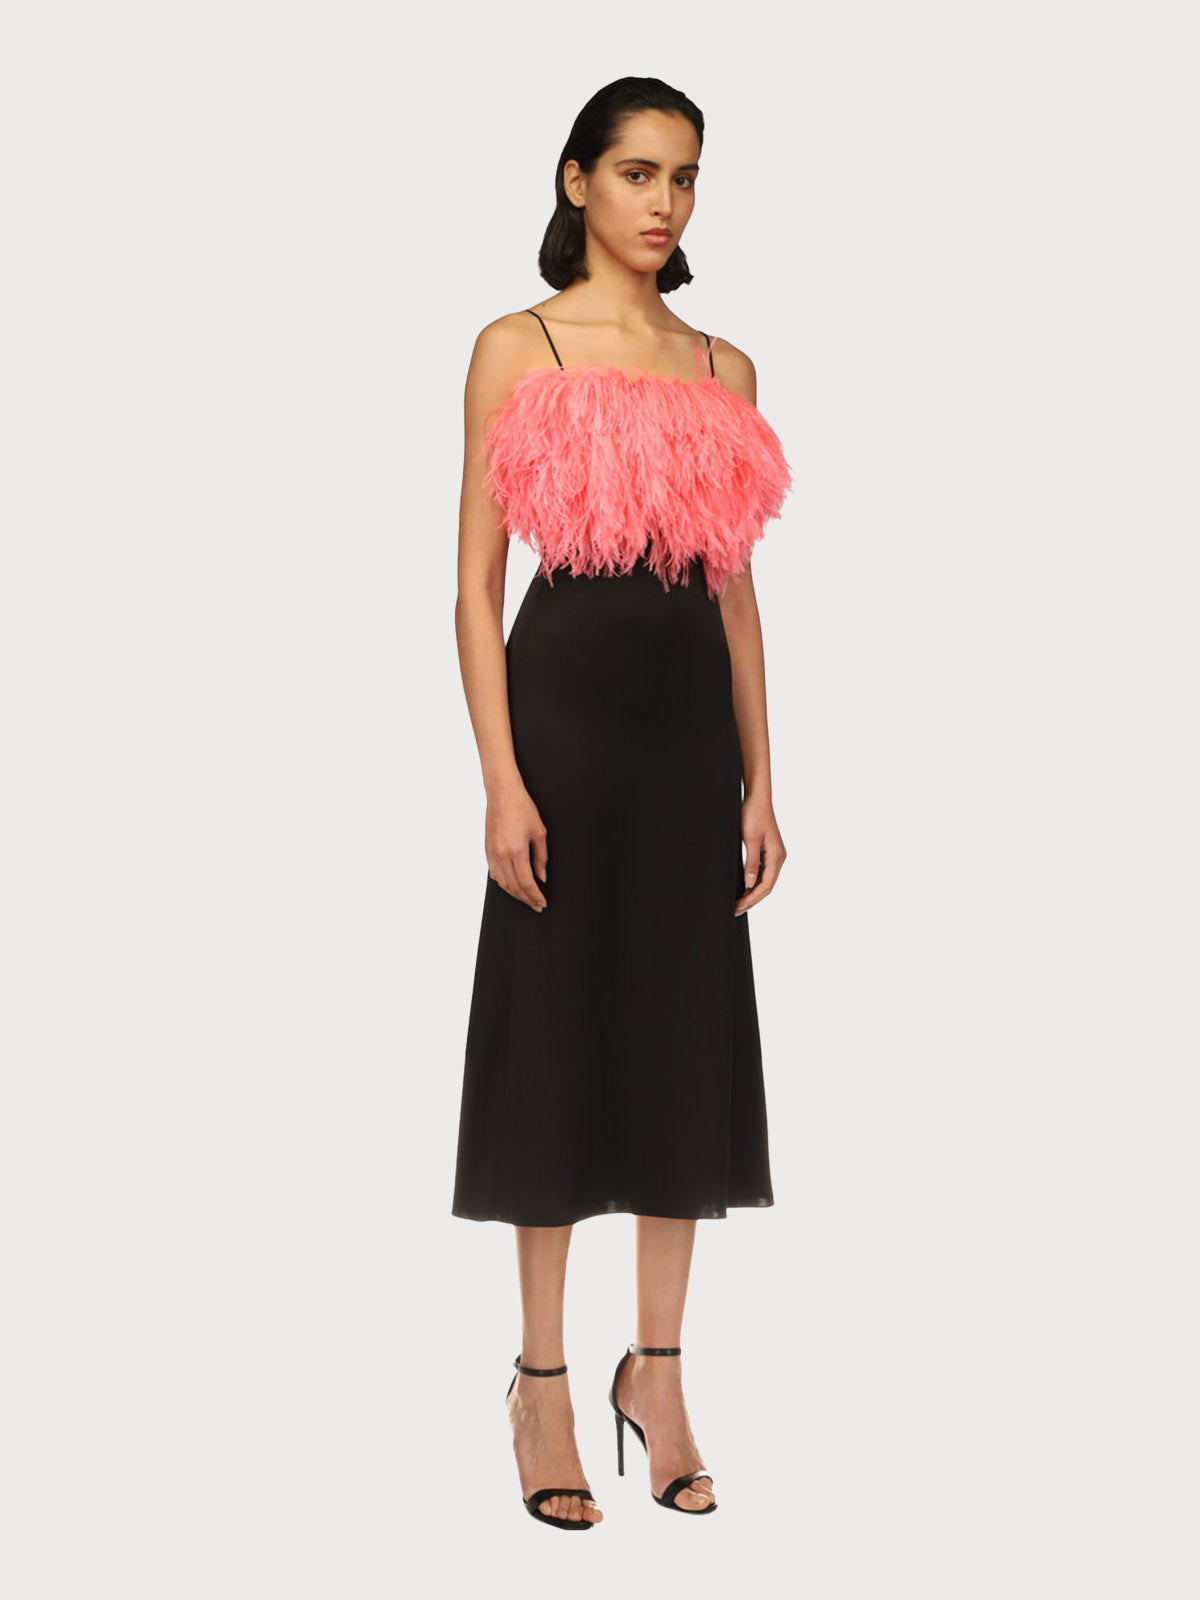 Satin Dress with Pink Feathers